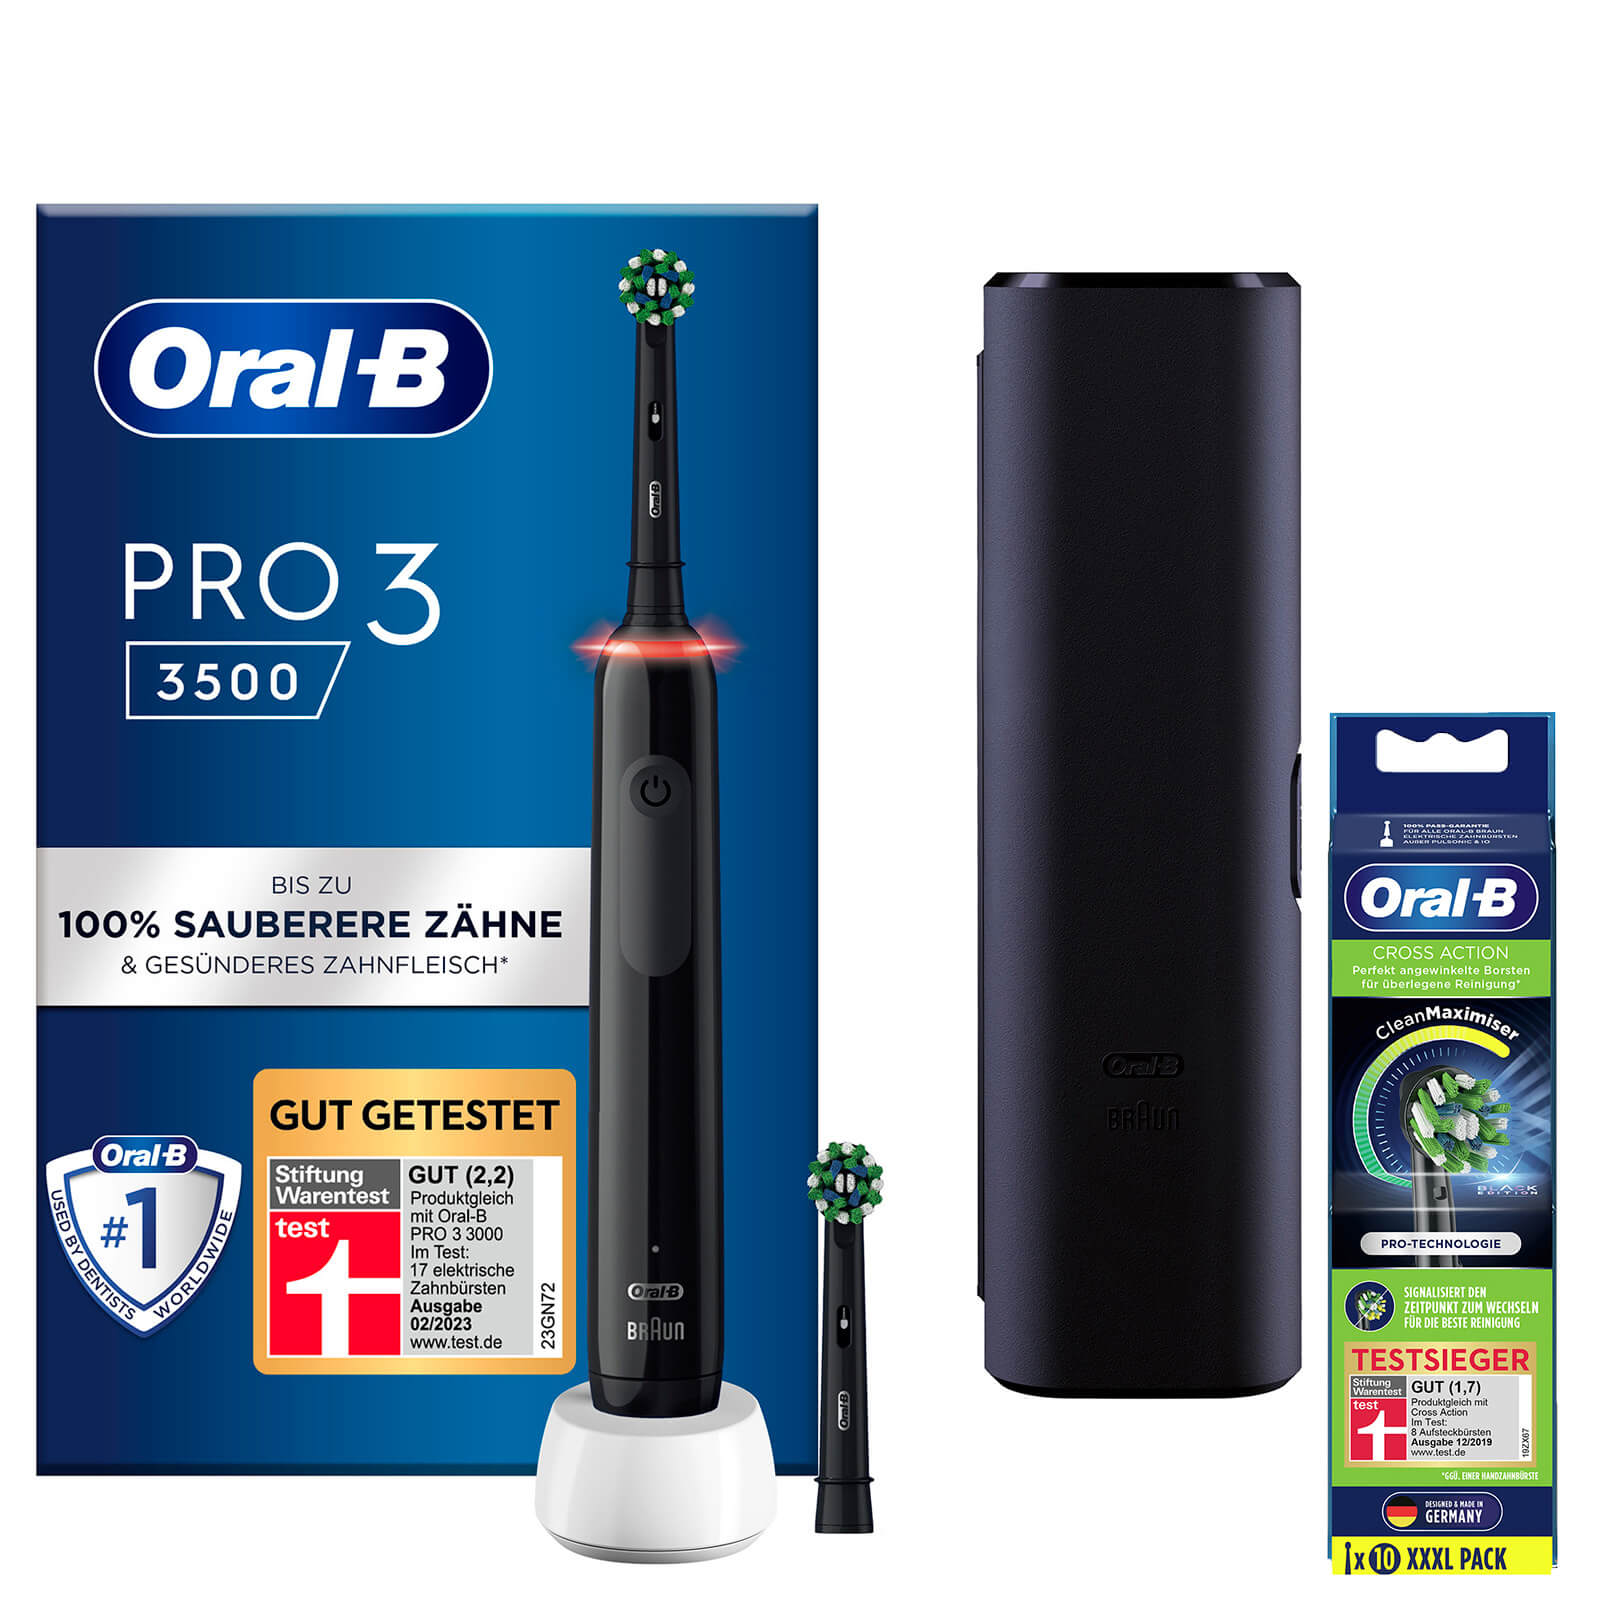 Oral B Power Pro 3 3500 - Toothbrush with 10 Brush Heads